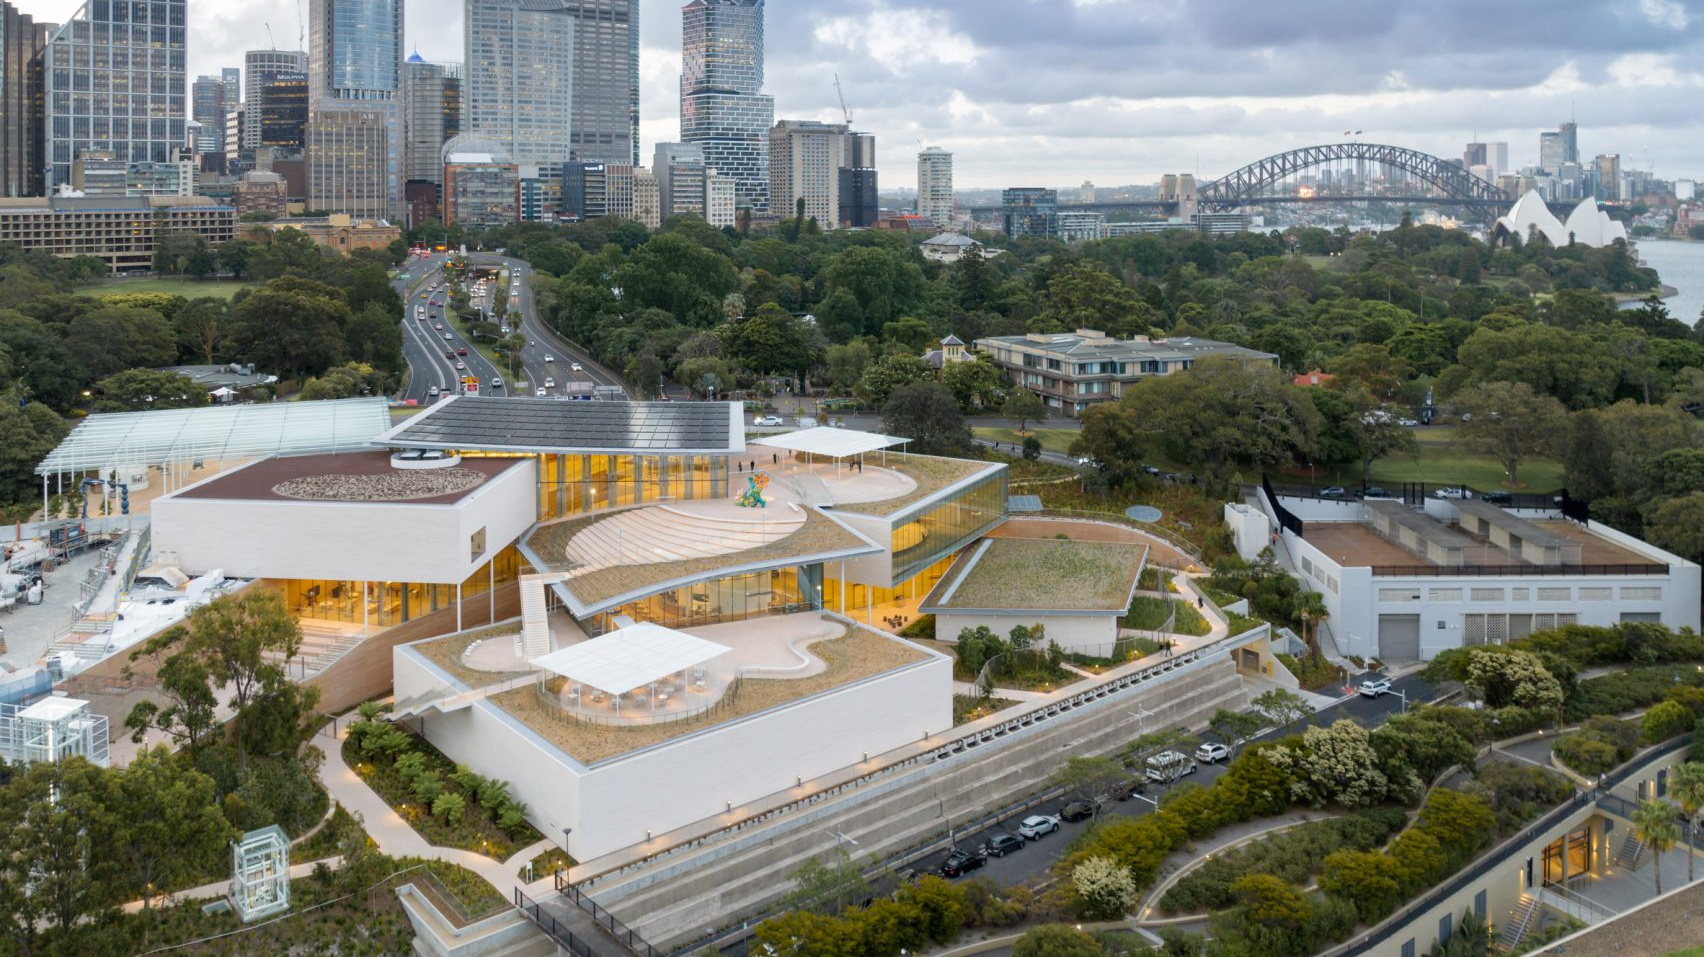 Aerial view of Sydney Modern art gallery showing the many pavilions on the slope over Sydney Harbour with the city and Opera House behind